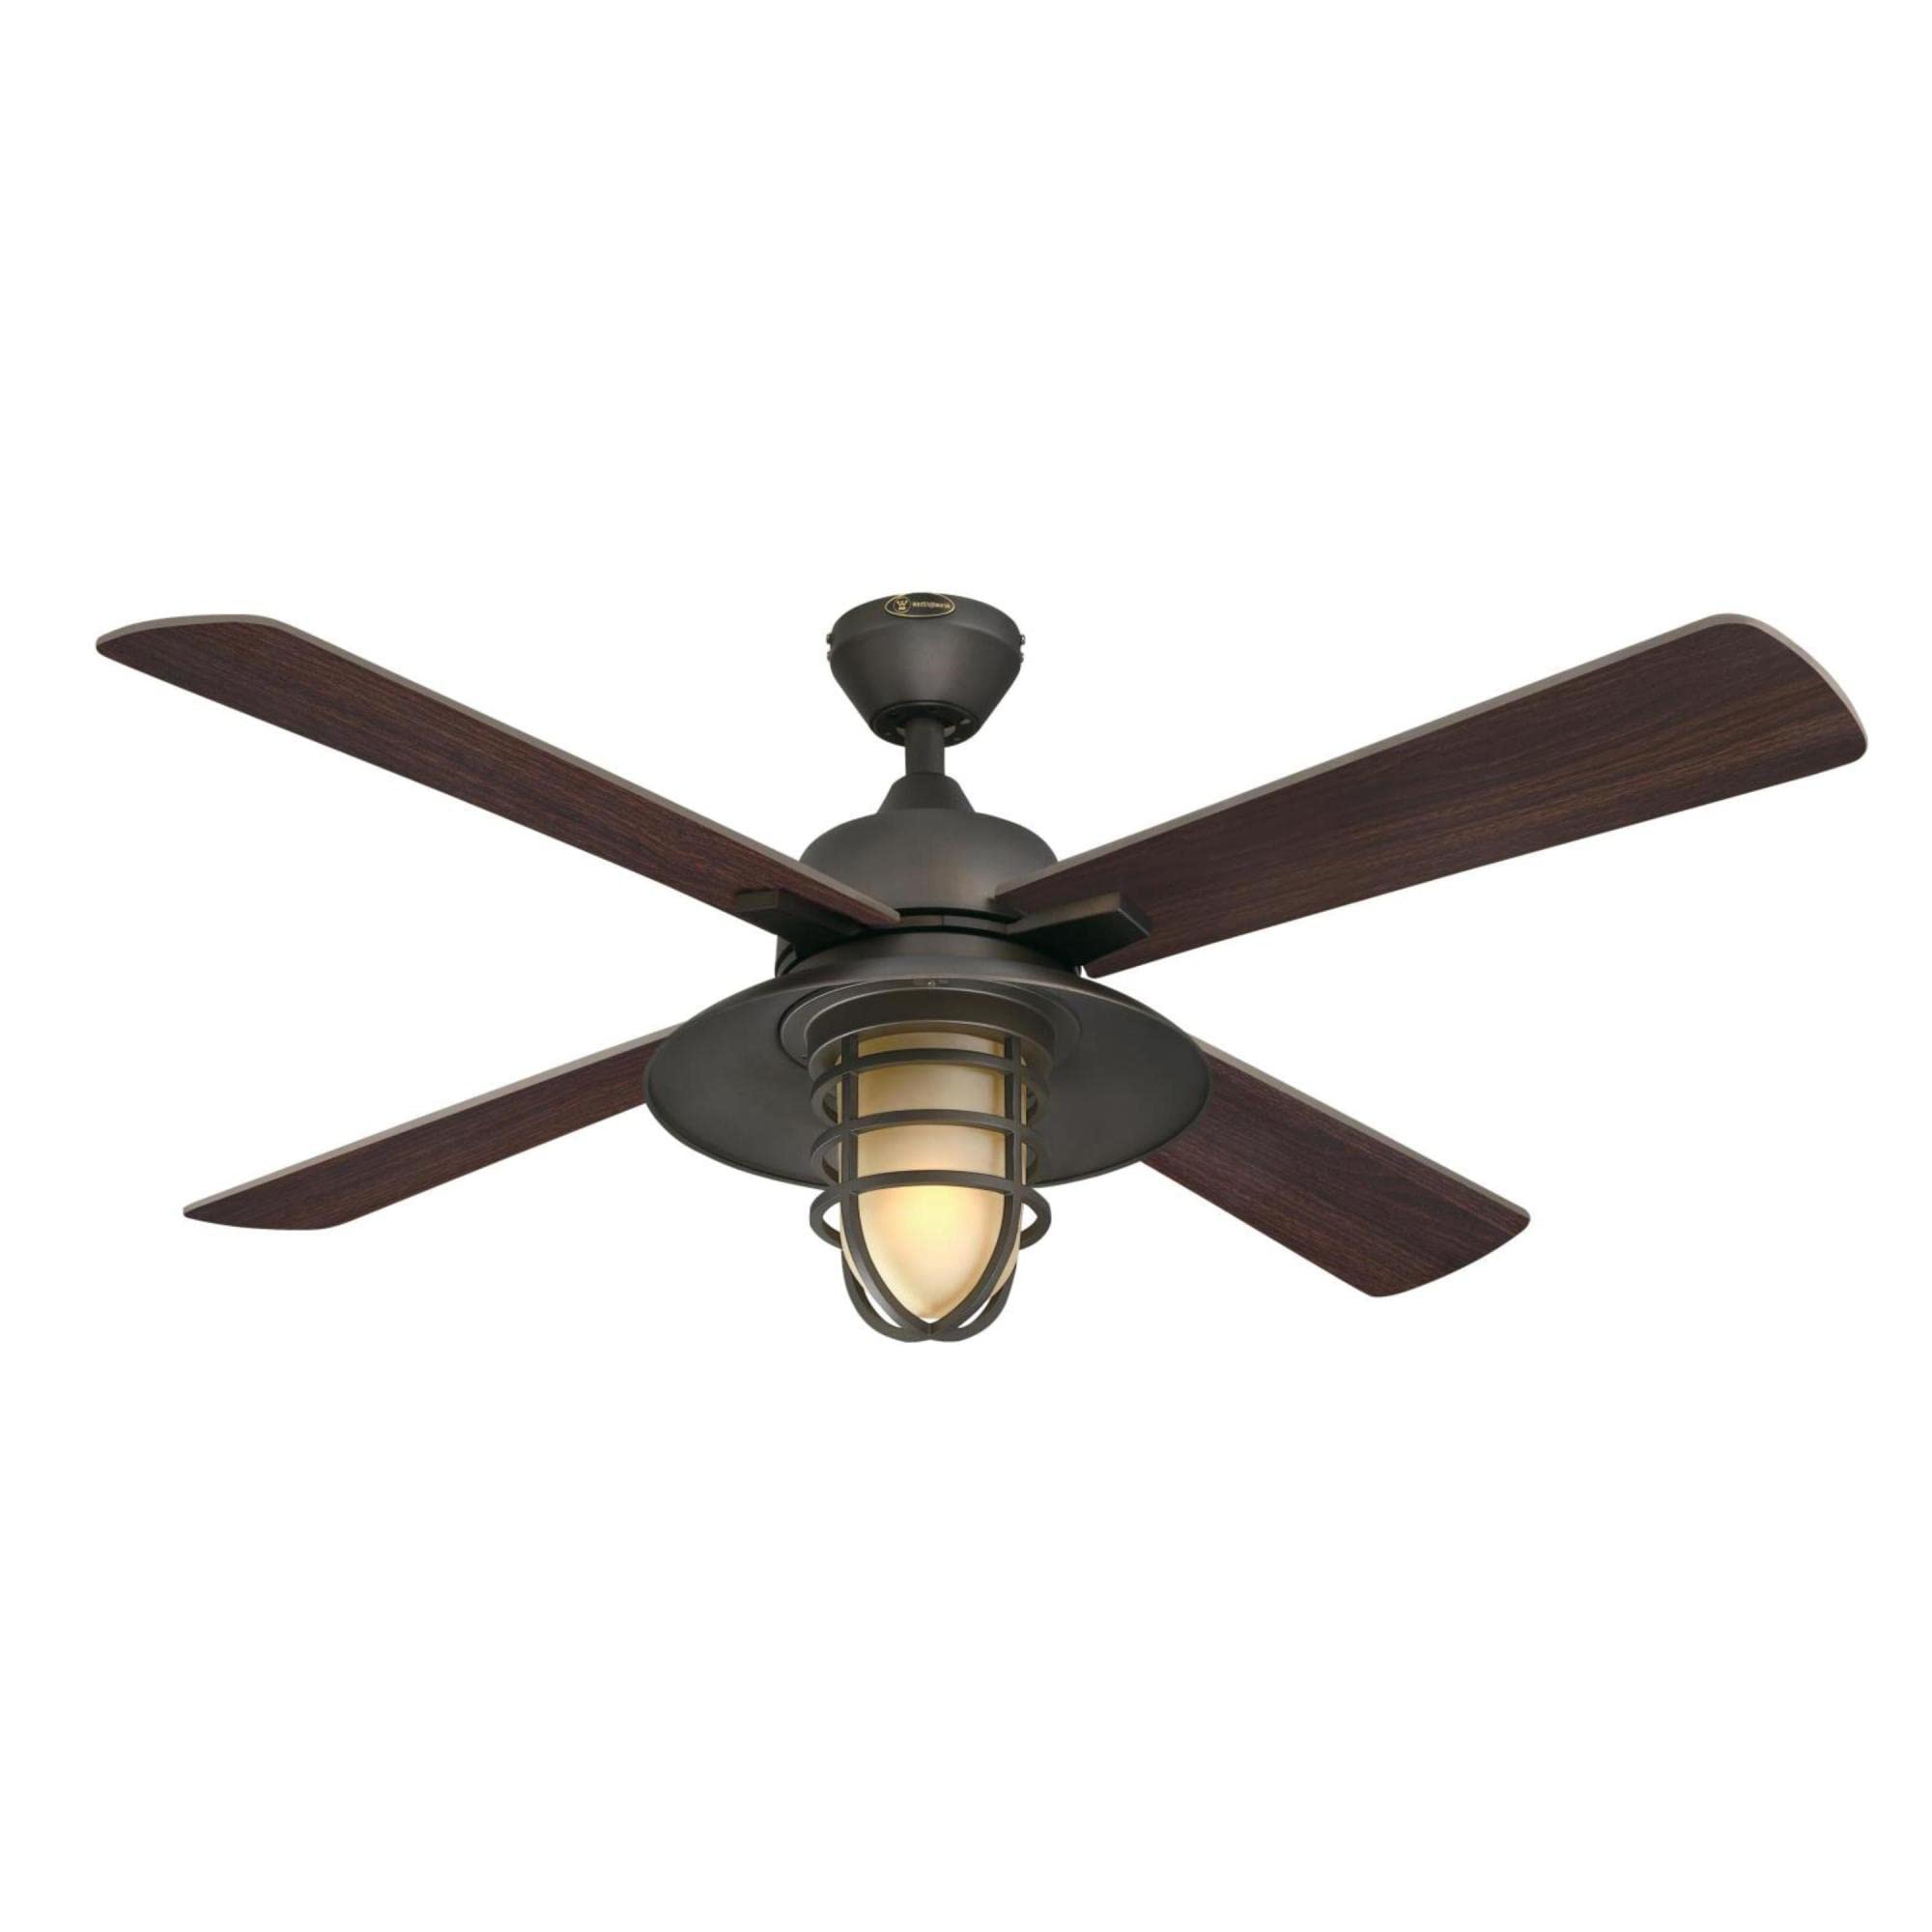 Westinghouse Lighting 74005B00 Porto, Smart WiFi Ceiling Fan Compatible with Amazon Alexa and Google Home with LED Light, Remote Control, 52 Inch, Black-Bronze Finish, Amber Frosted Glass